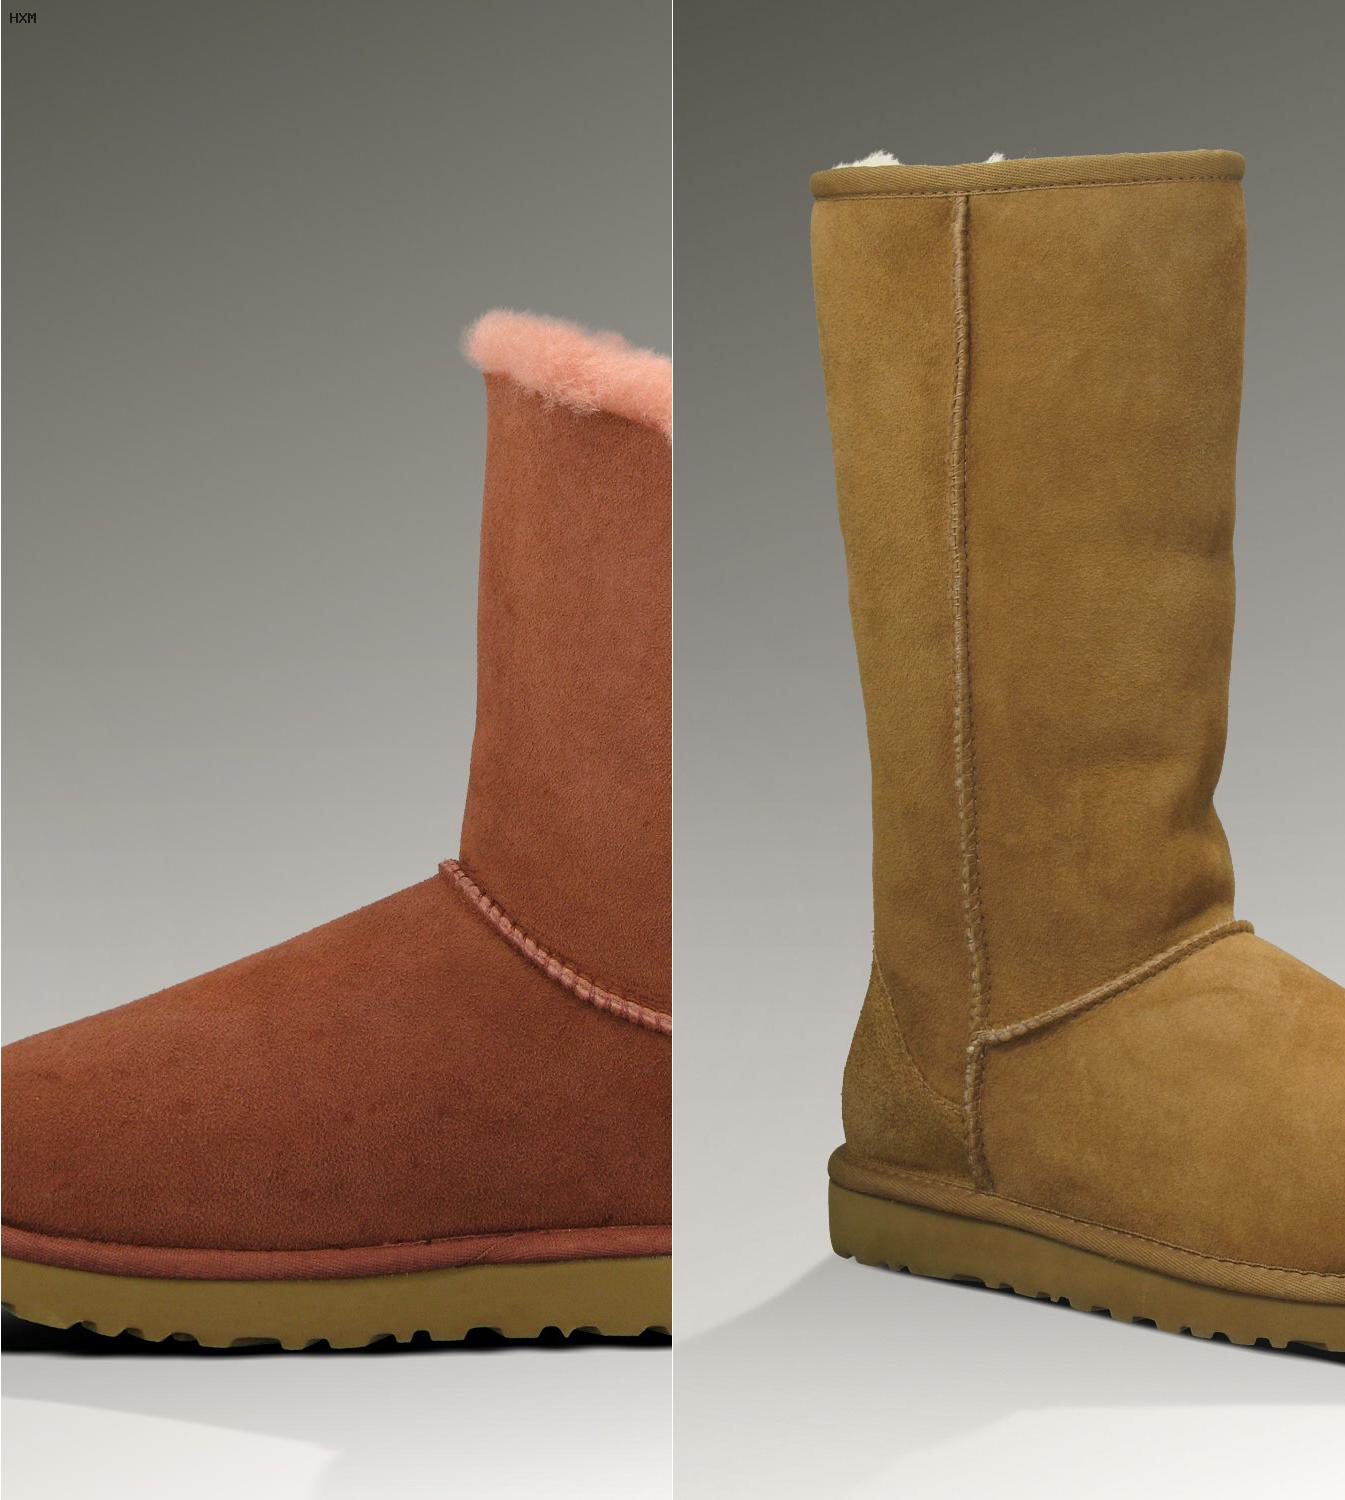 ugg shoes south africa